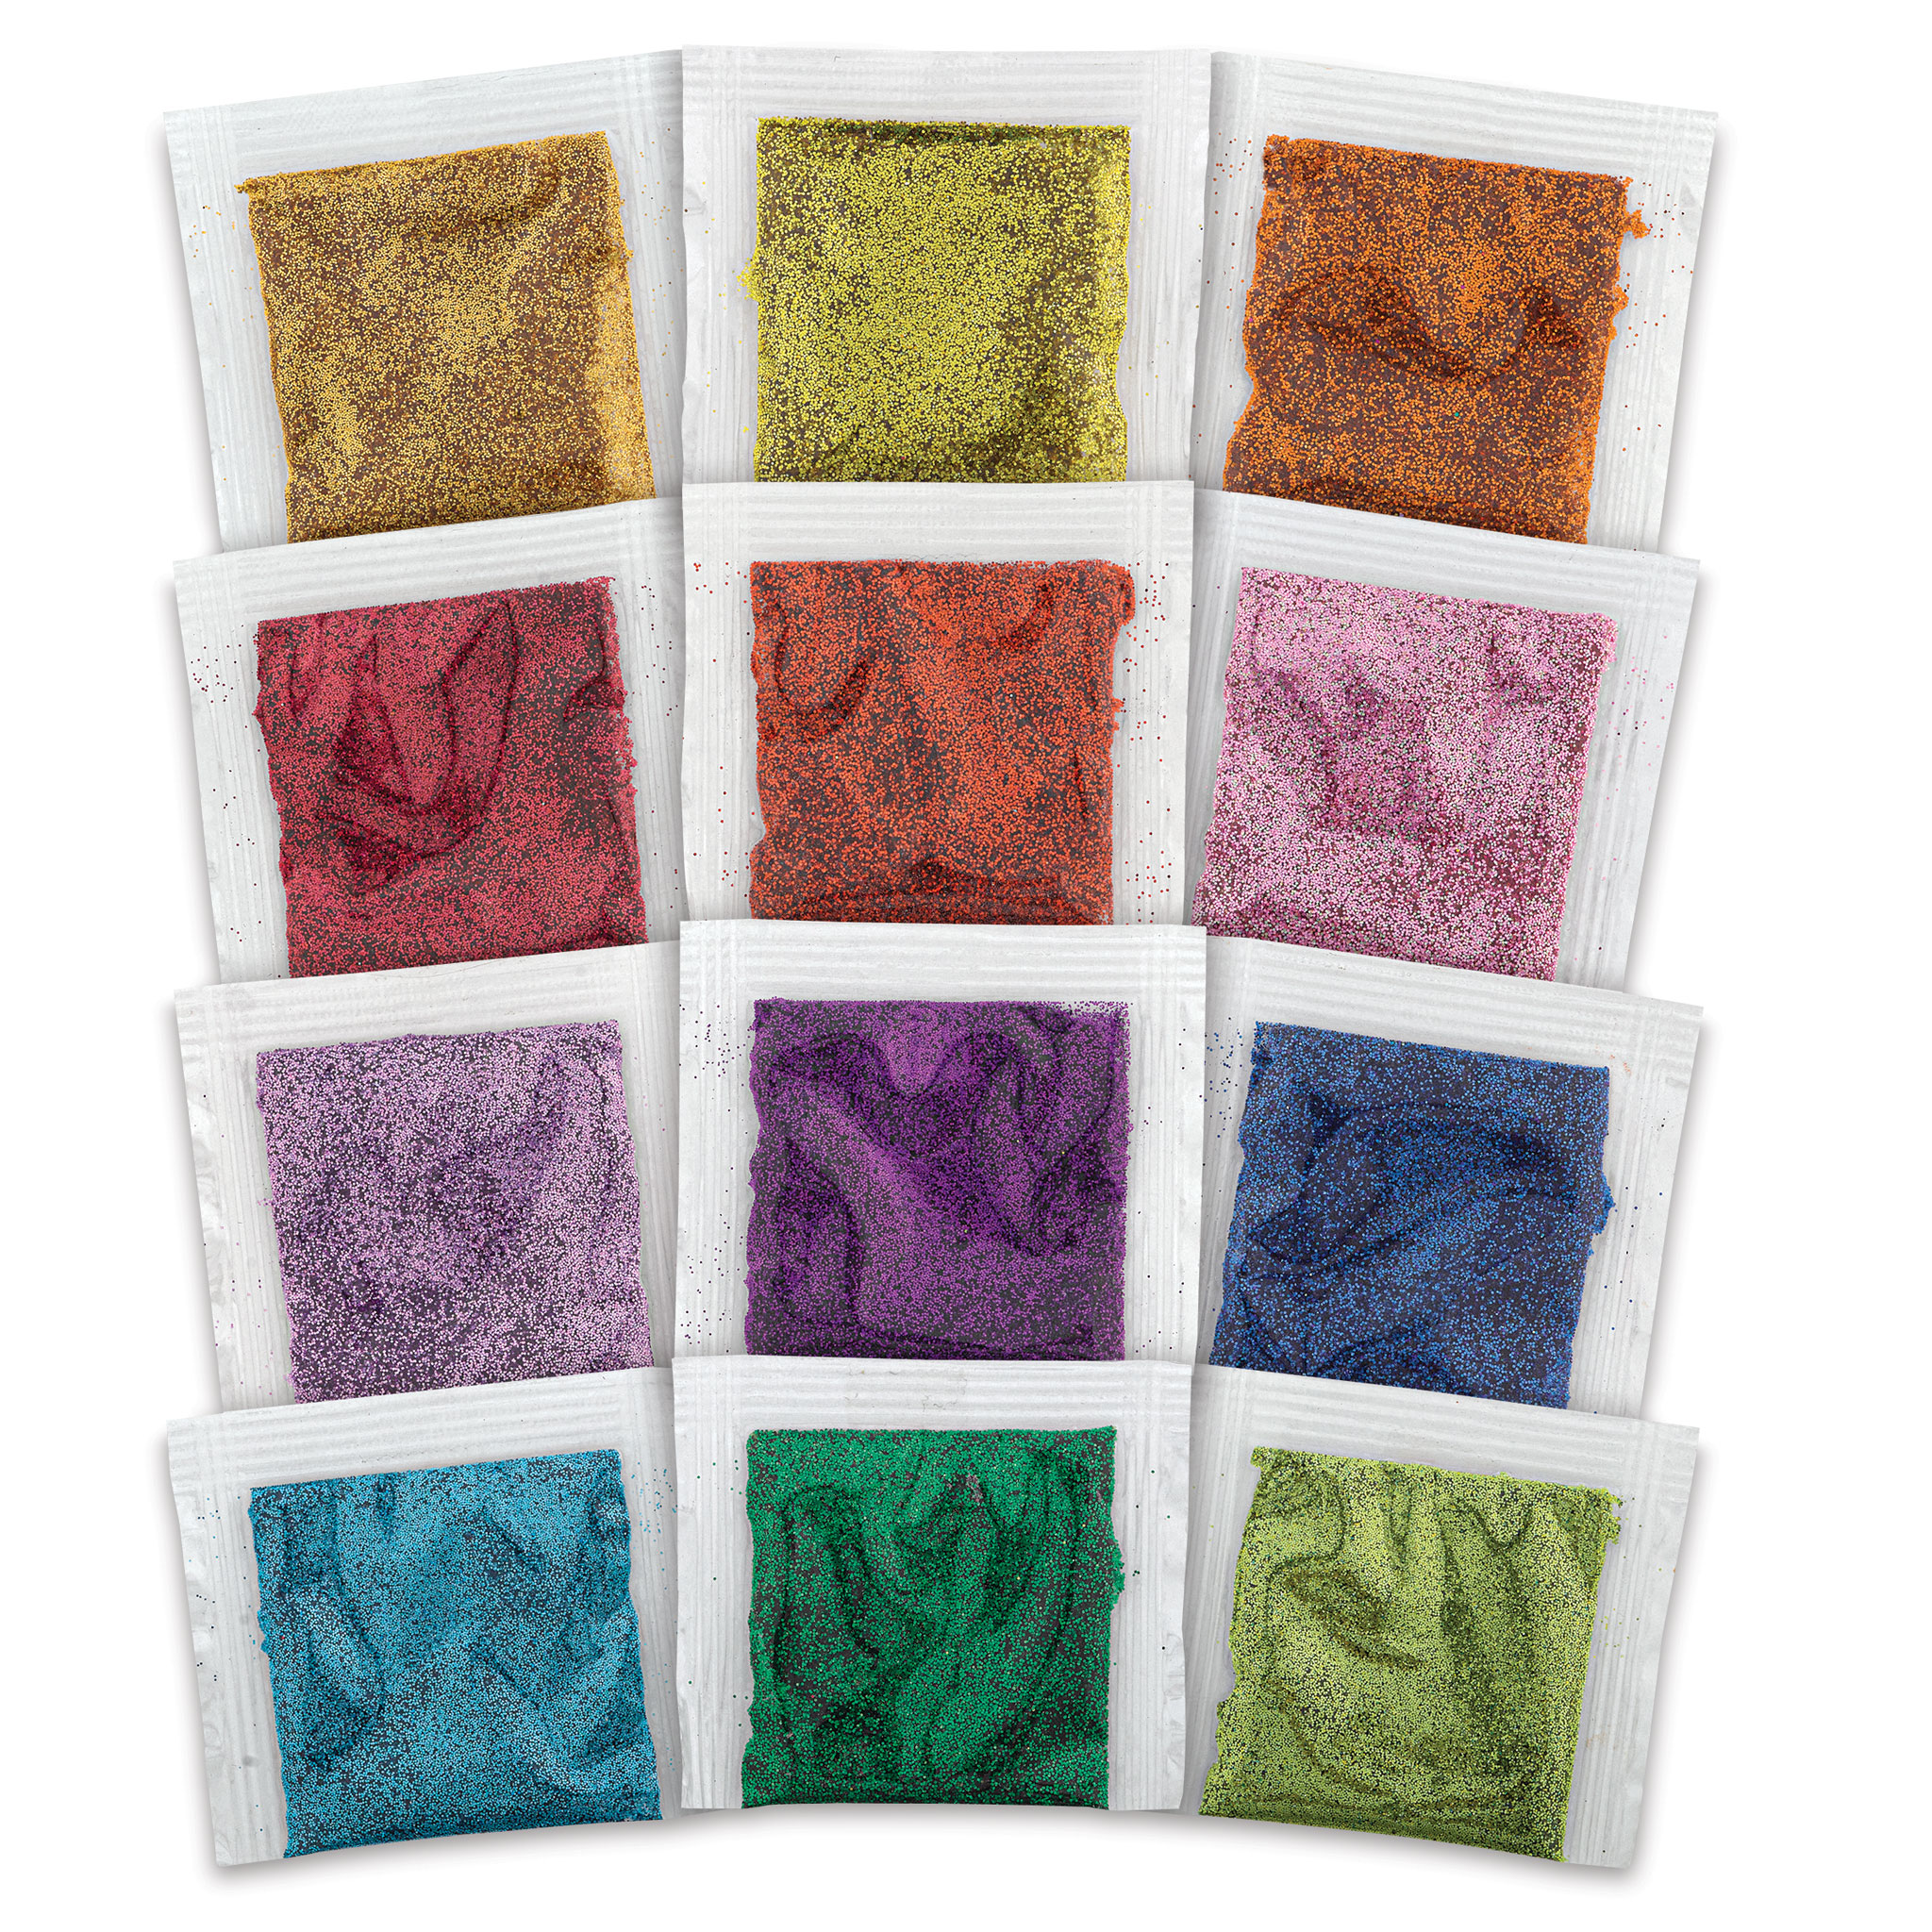 Hello Hobby Glitter Packs, 16-Pack, Boys and Girls, Child, Ages 6+, Size: 16 Pack